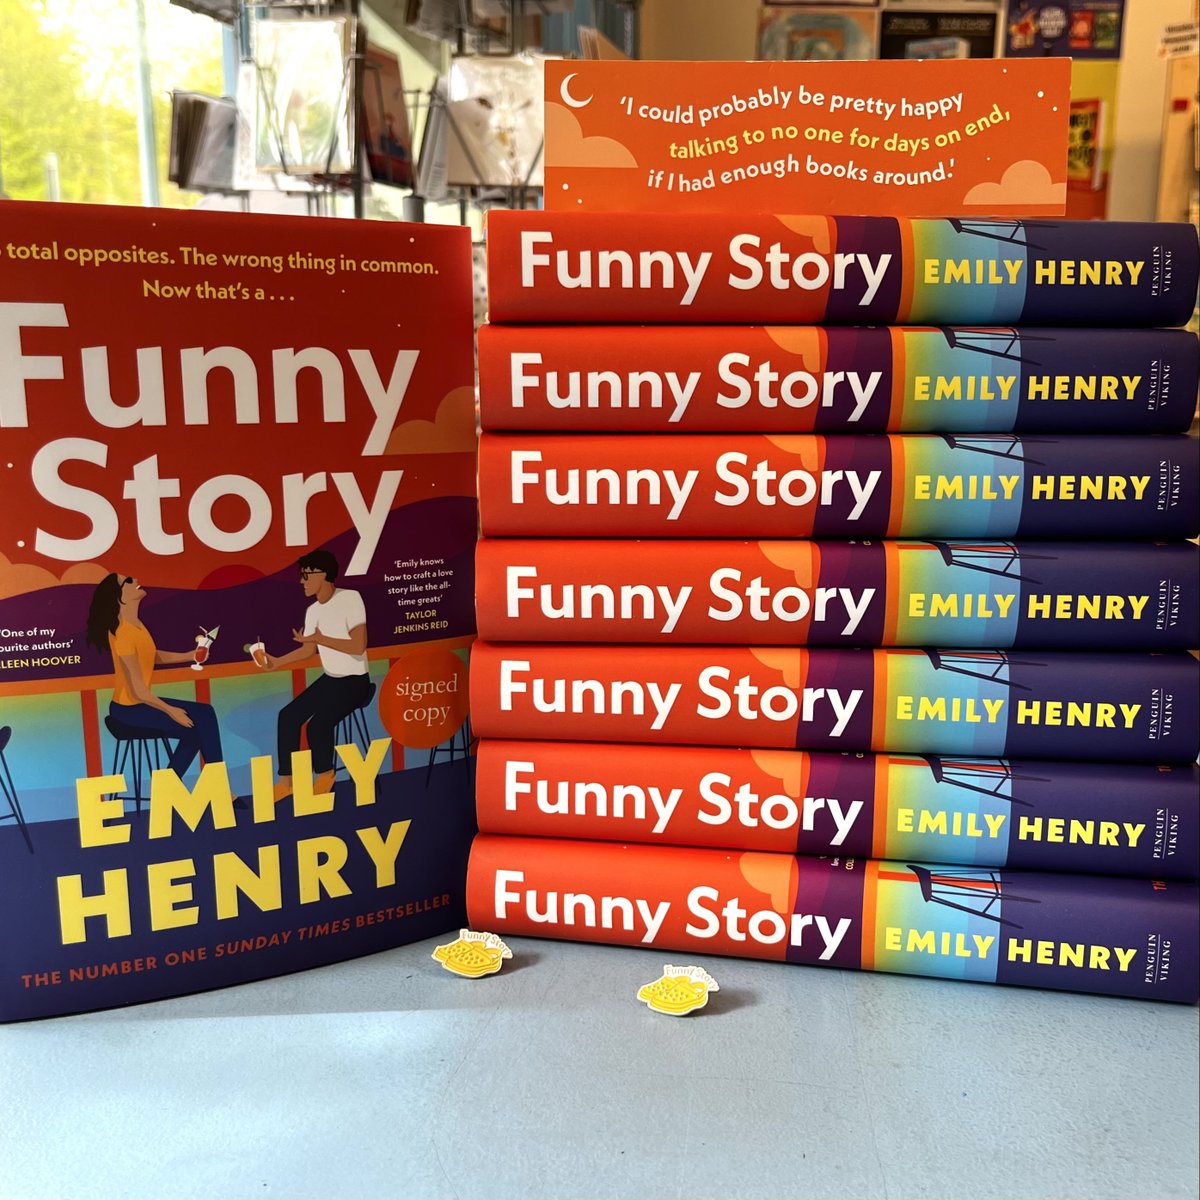 ☀️Out this week is Funny Story! ☀️Pick up Emily Henry's latest romcom about two people with something in common... Signed editions available in shop, each purchase comes with a free pin and bookmark* 😁 While stock lasts!*